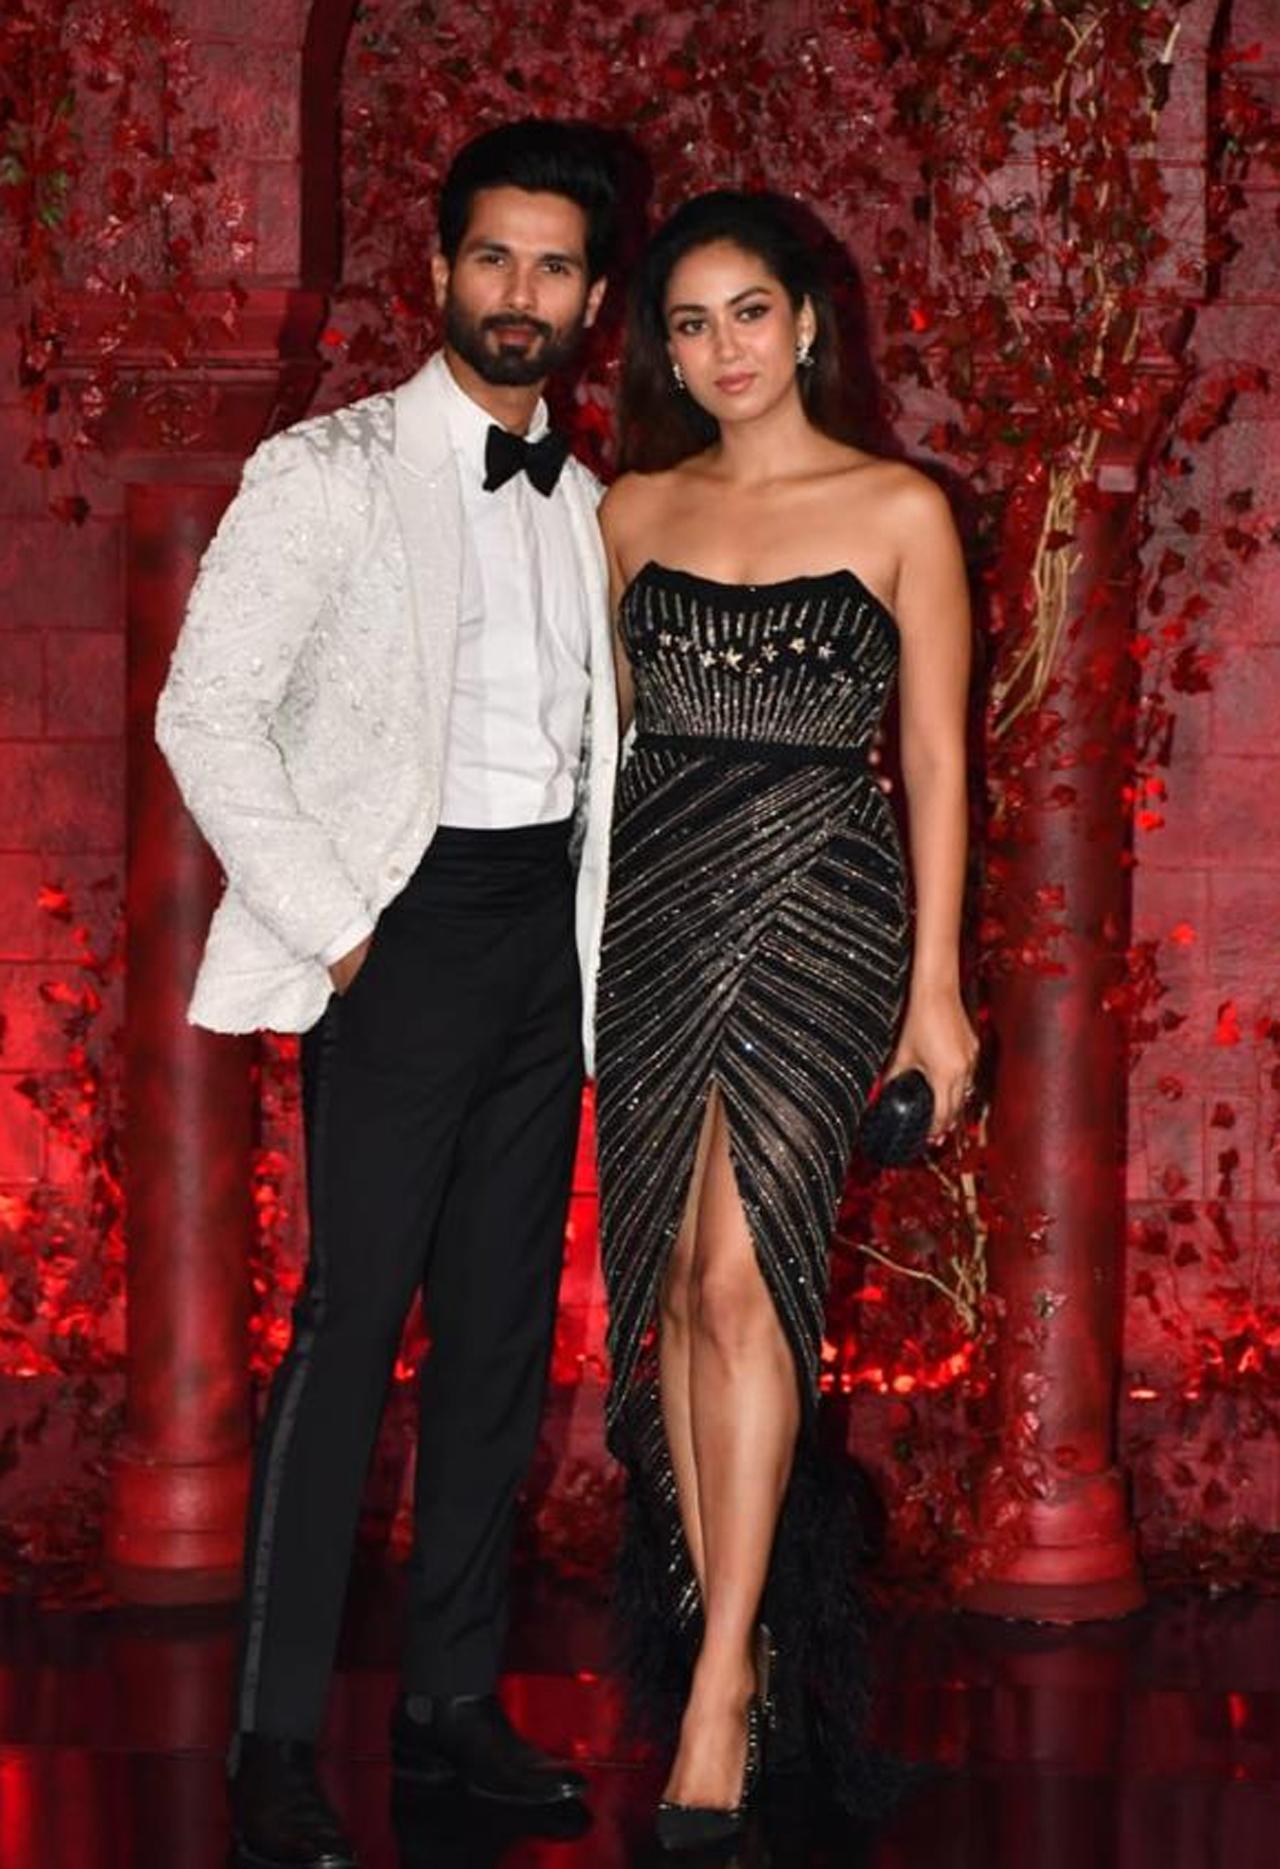 Shahid Kapoor and Mira Rajput are one of the most stylish couples of Bollywood and this picture proves it.